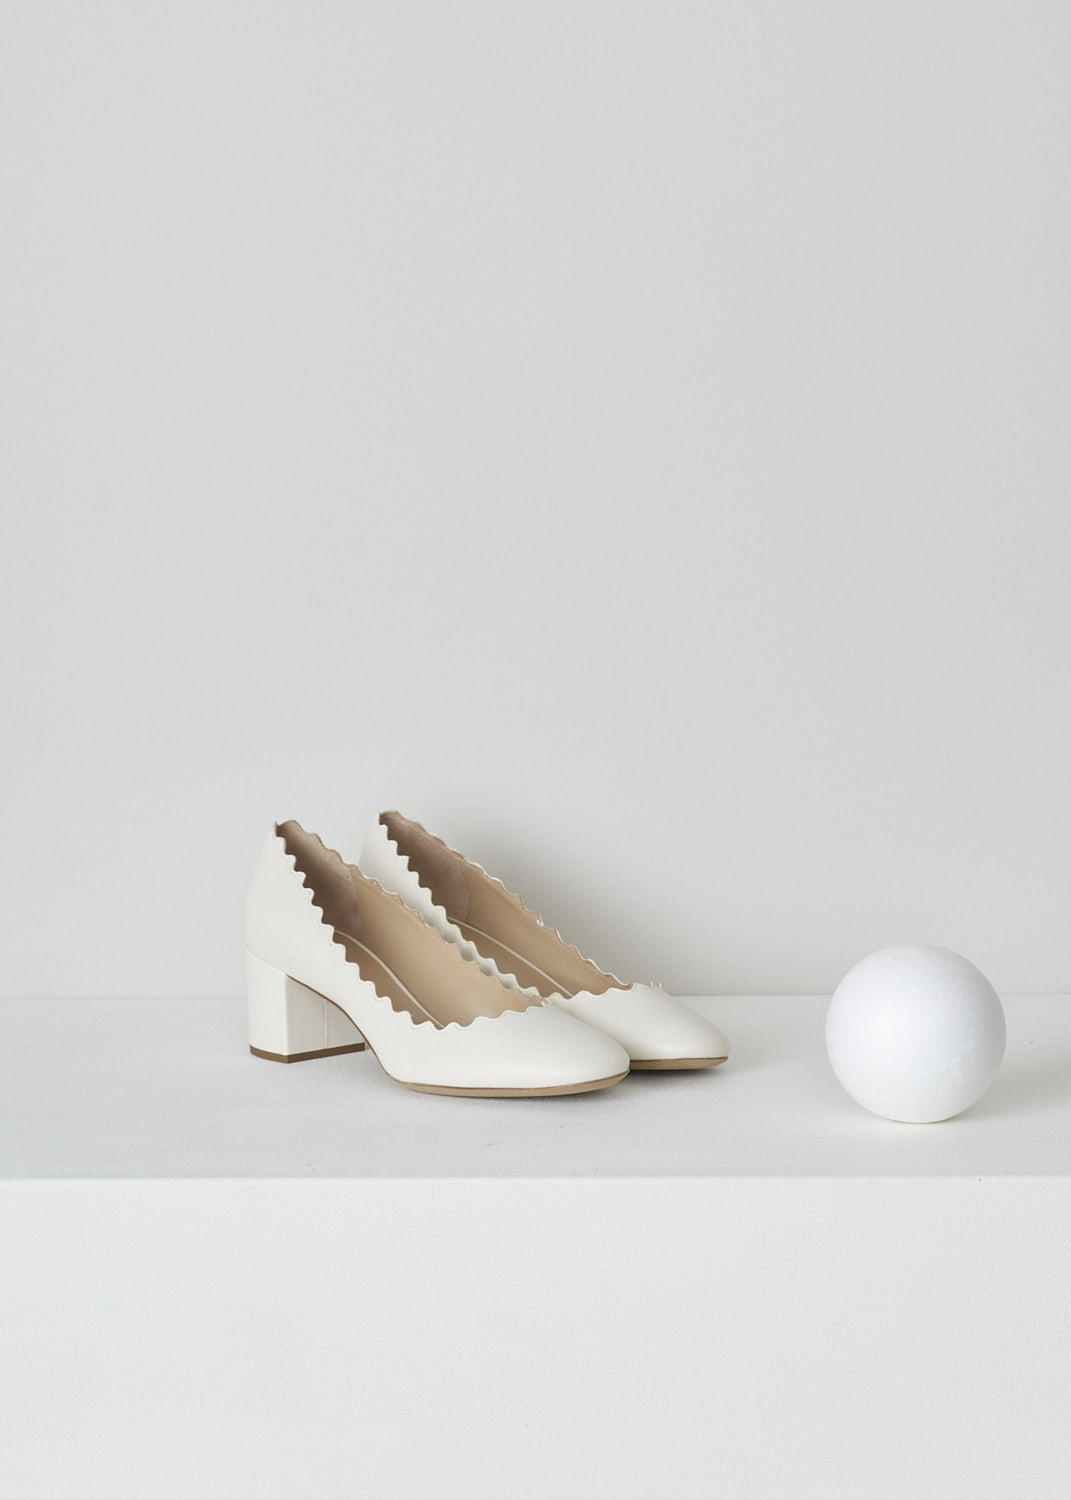 CHLOÃ‰, SCALLOPED LAUREN PUMPS IN CLOUDY WHITE, CHC16A23075121_CLOUDY_WHITE,  White, Front, White leather Lauren pumps featuring a sturdy block heel, round toe vamp and a scalloped top-line.
